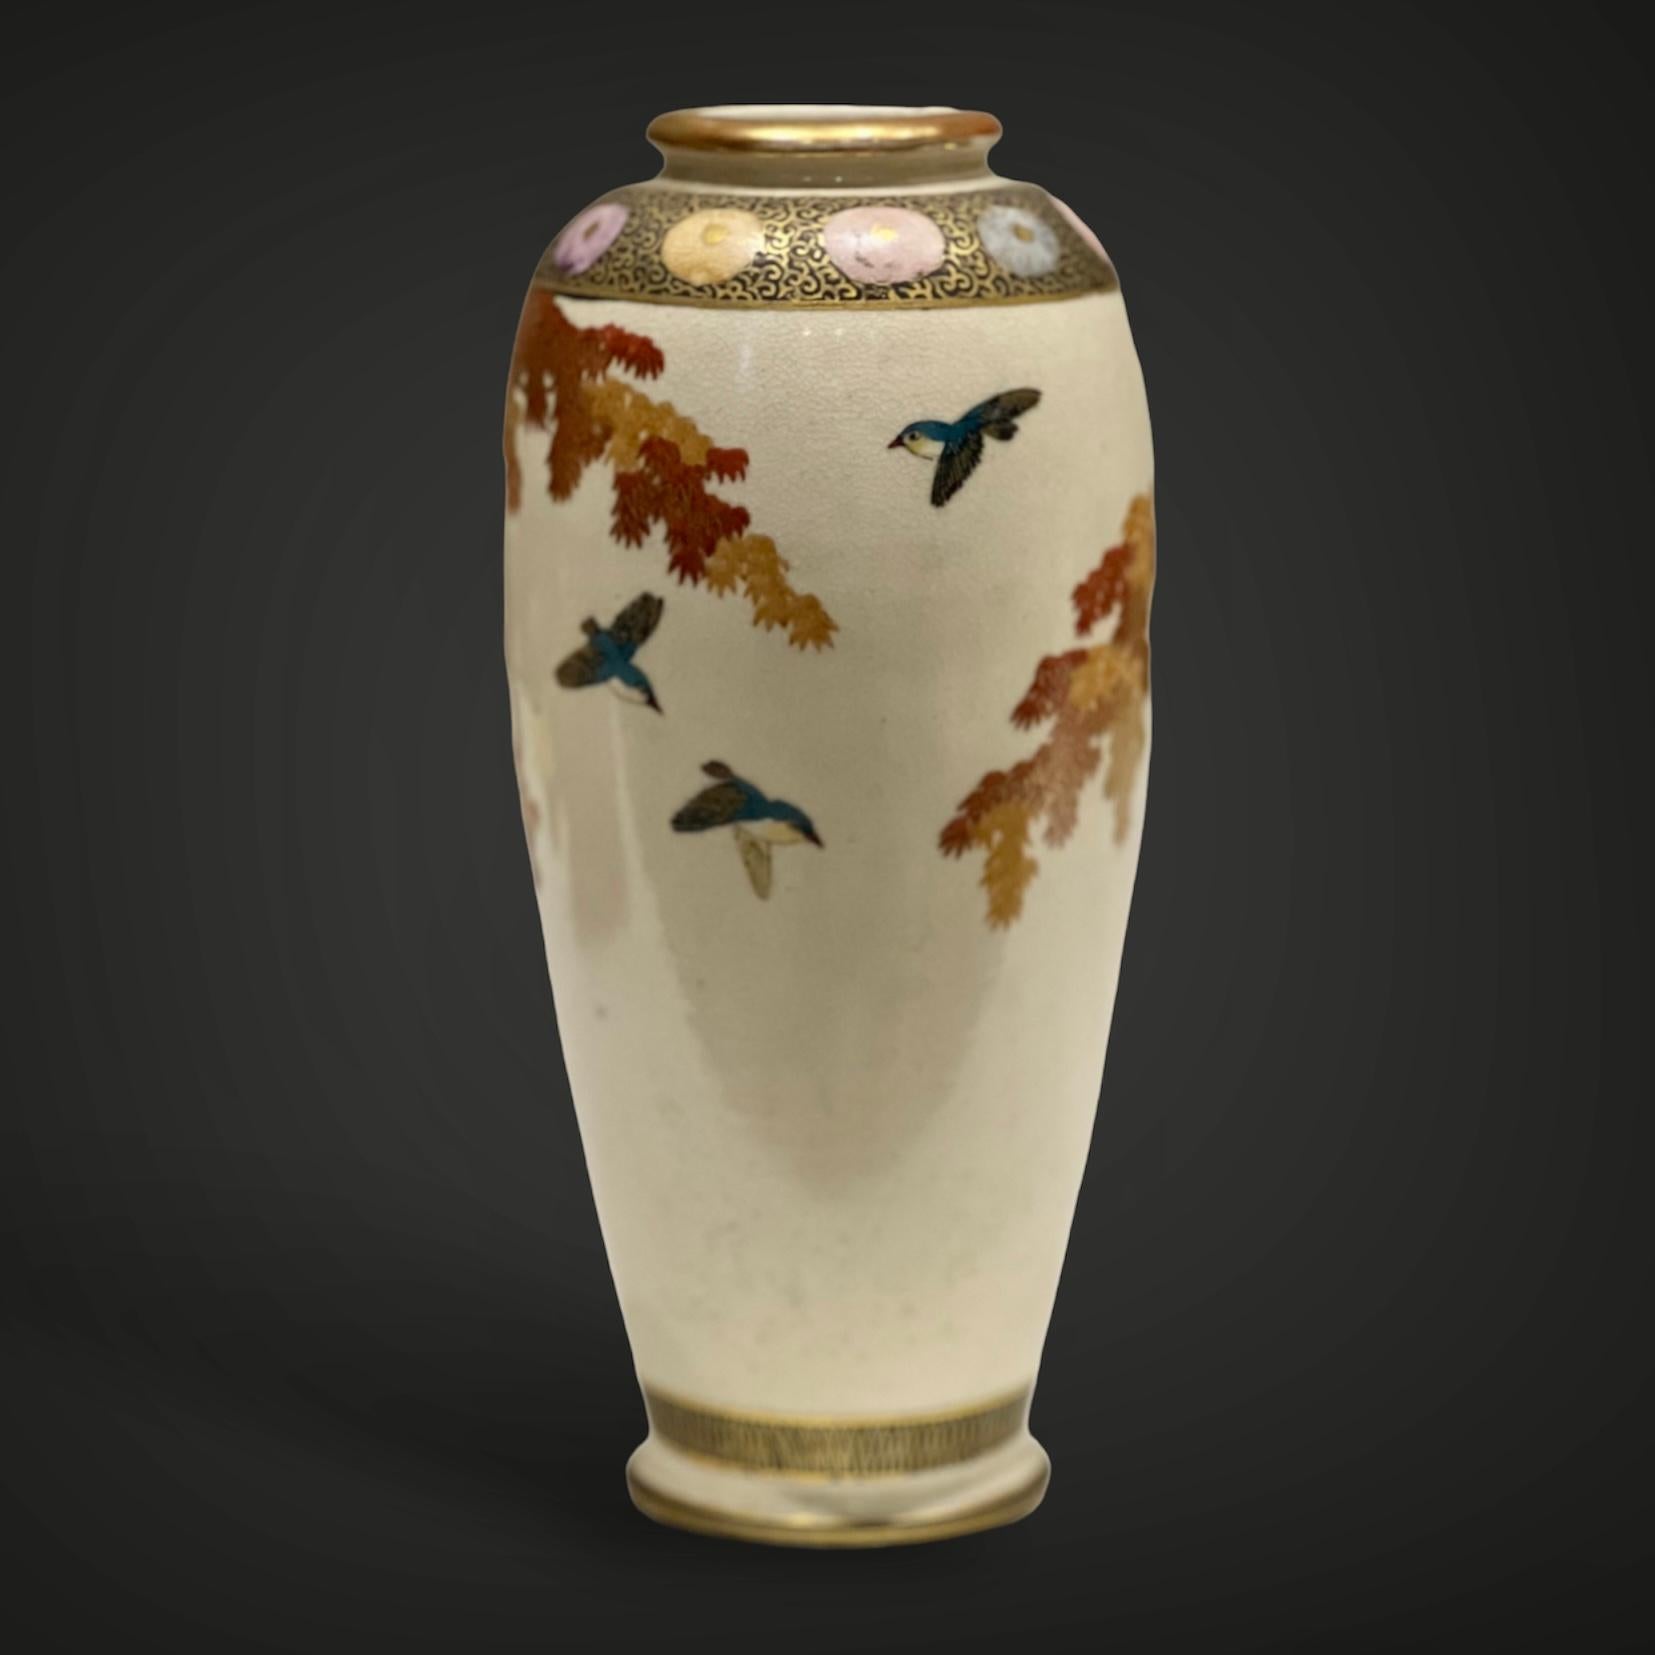 Magnificent Antique Japanese Satsuma Vase, Meiji Era, Signed In Good Condition For Sale In London, GB